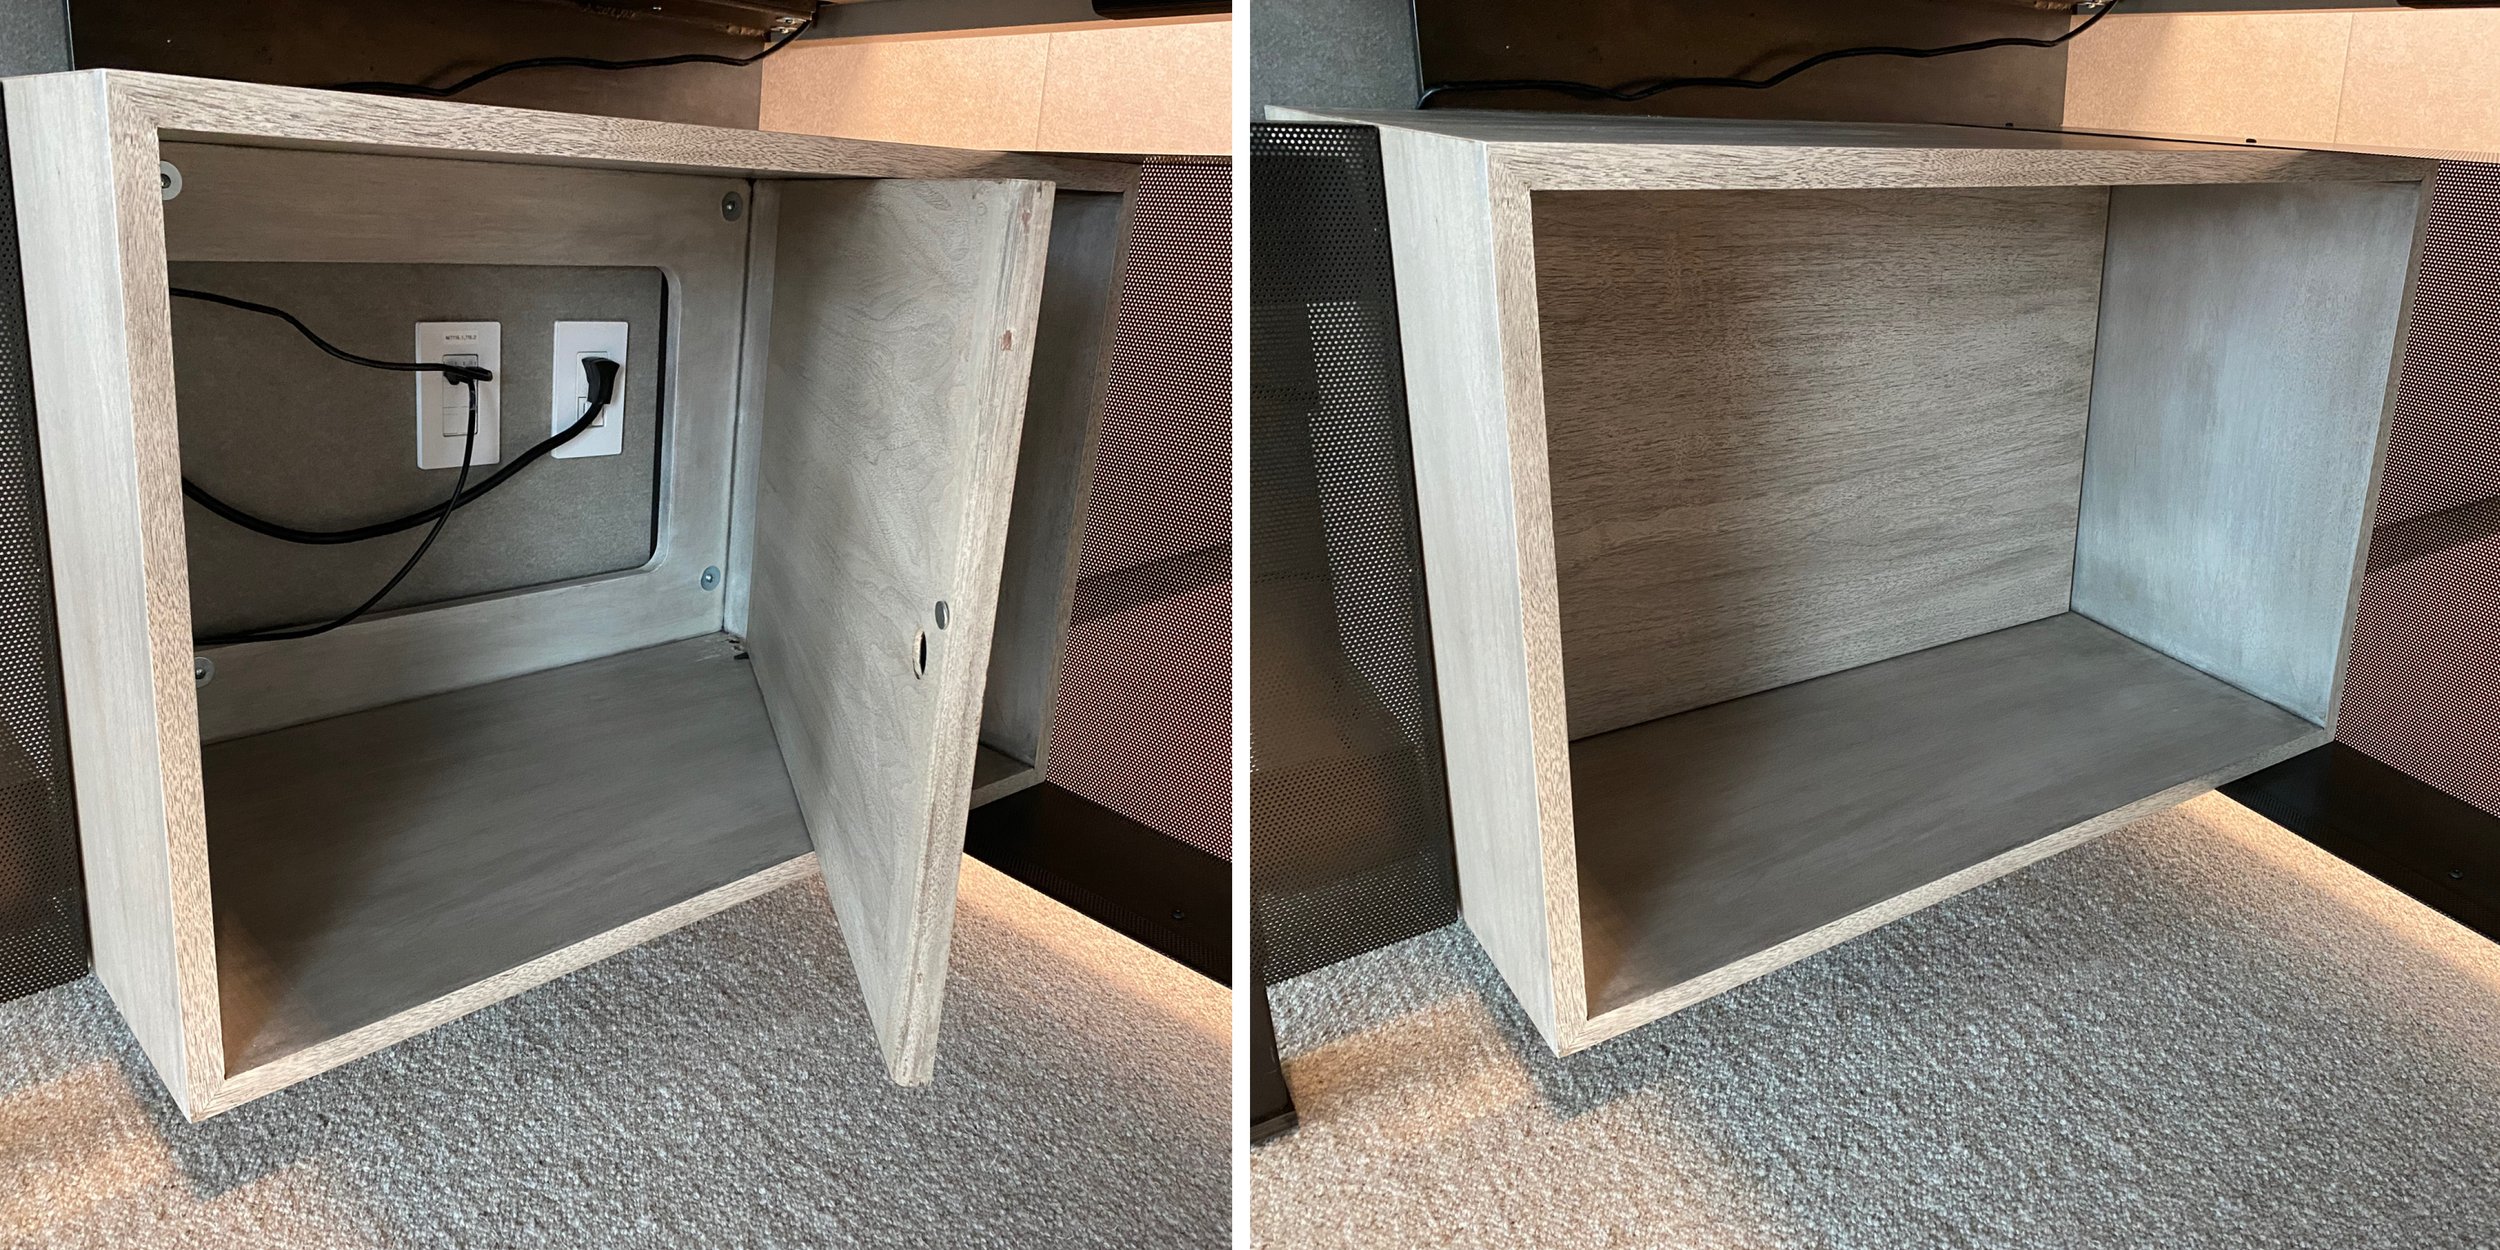 OPEN CUBBIES UNDERNEATH THE DESKTOP CONCEAL CORDS WITH FALSE BACKS THAT CAN BE ACCESSED VIA A HINGED, PIVOTING DOOR.